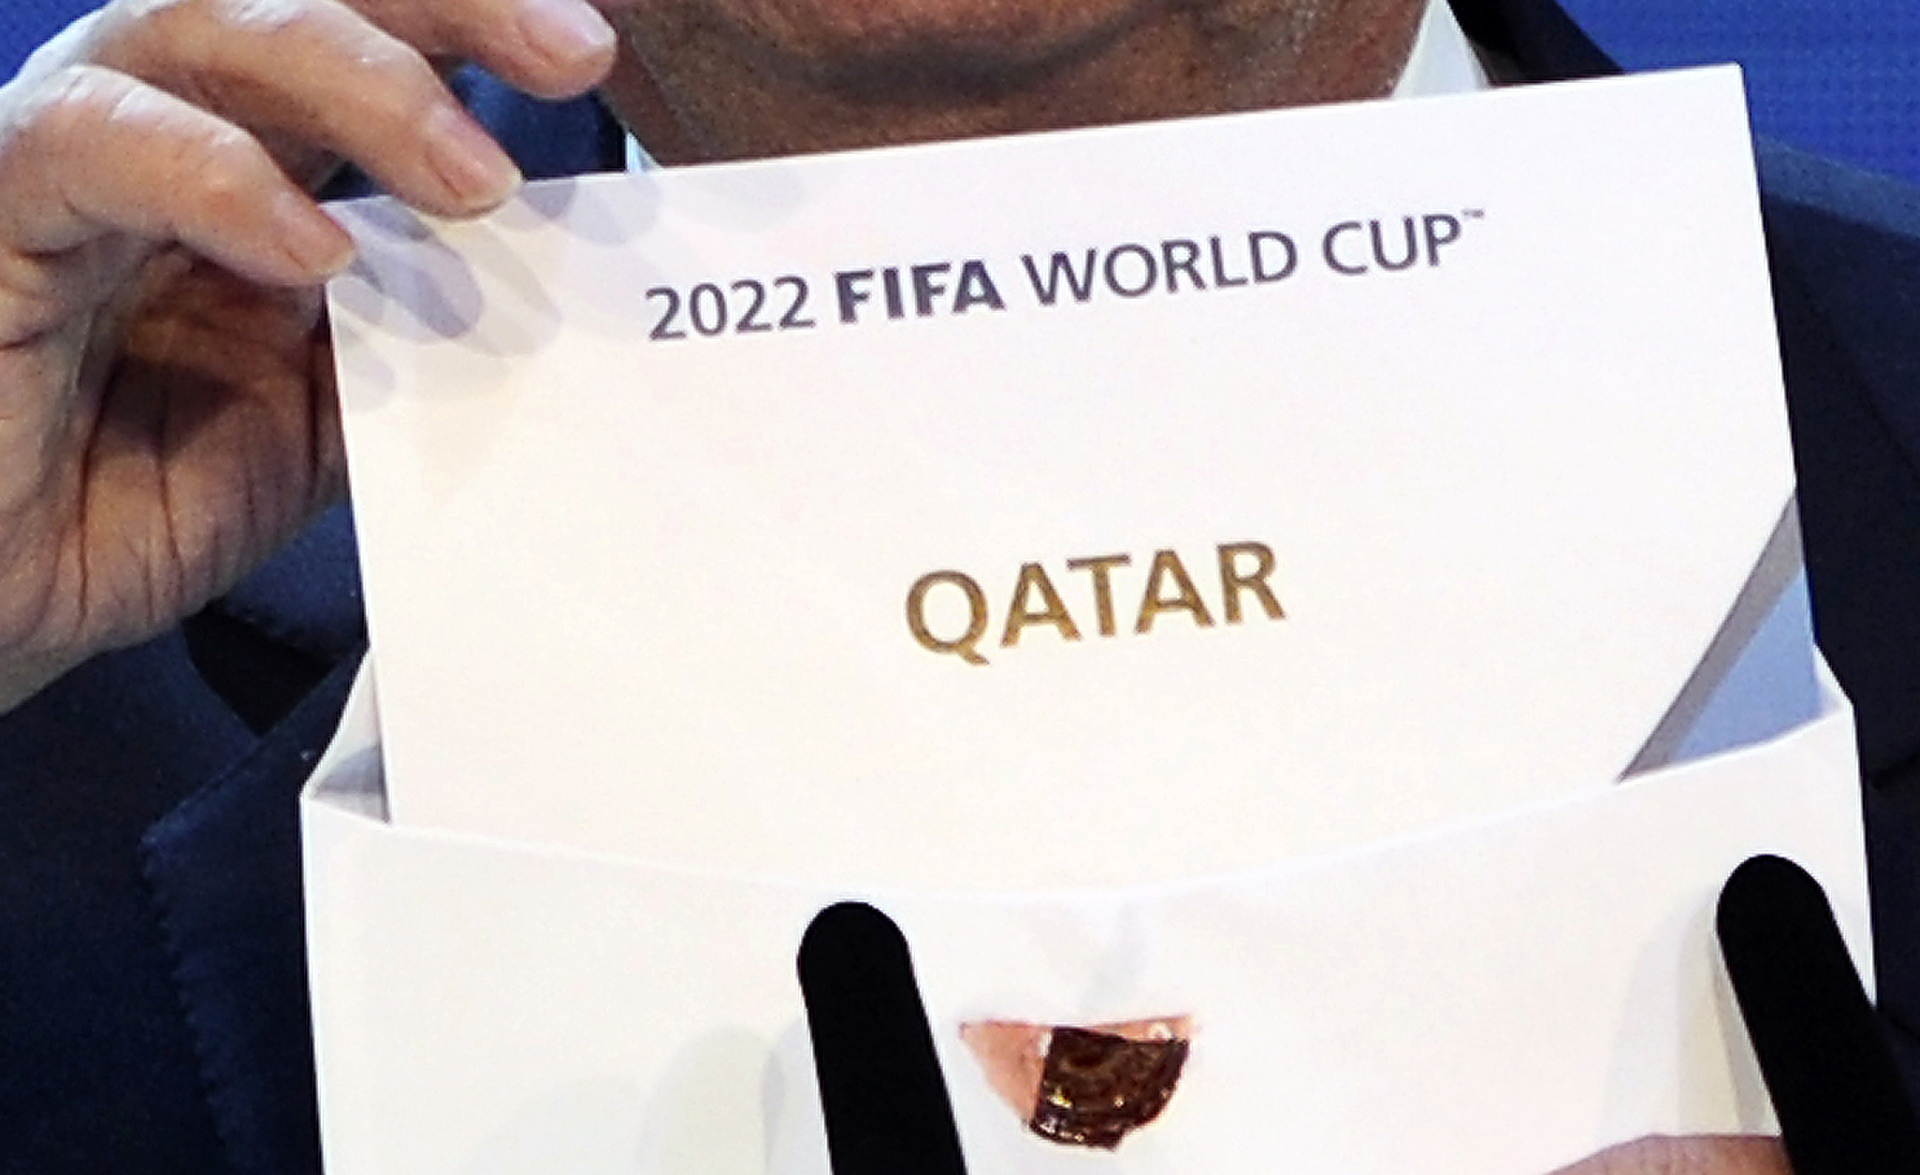 FIFA president Joseph Blatter opens the envelope to reveal that Qatar will host the 2022 World Cup at the FIFA headquarters in Zurich on December 2, 2010. Qatar became the first Arab, Middle Eastern or Muslim country to be awarded the right to stage football's World Cup.  AFP PHOTO / FABRICE COFFRINI (Photo credit should read FABRICE COFFRINI/AFP/Getty Images)